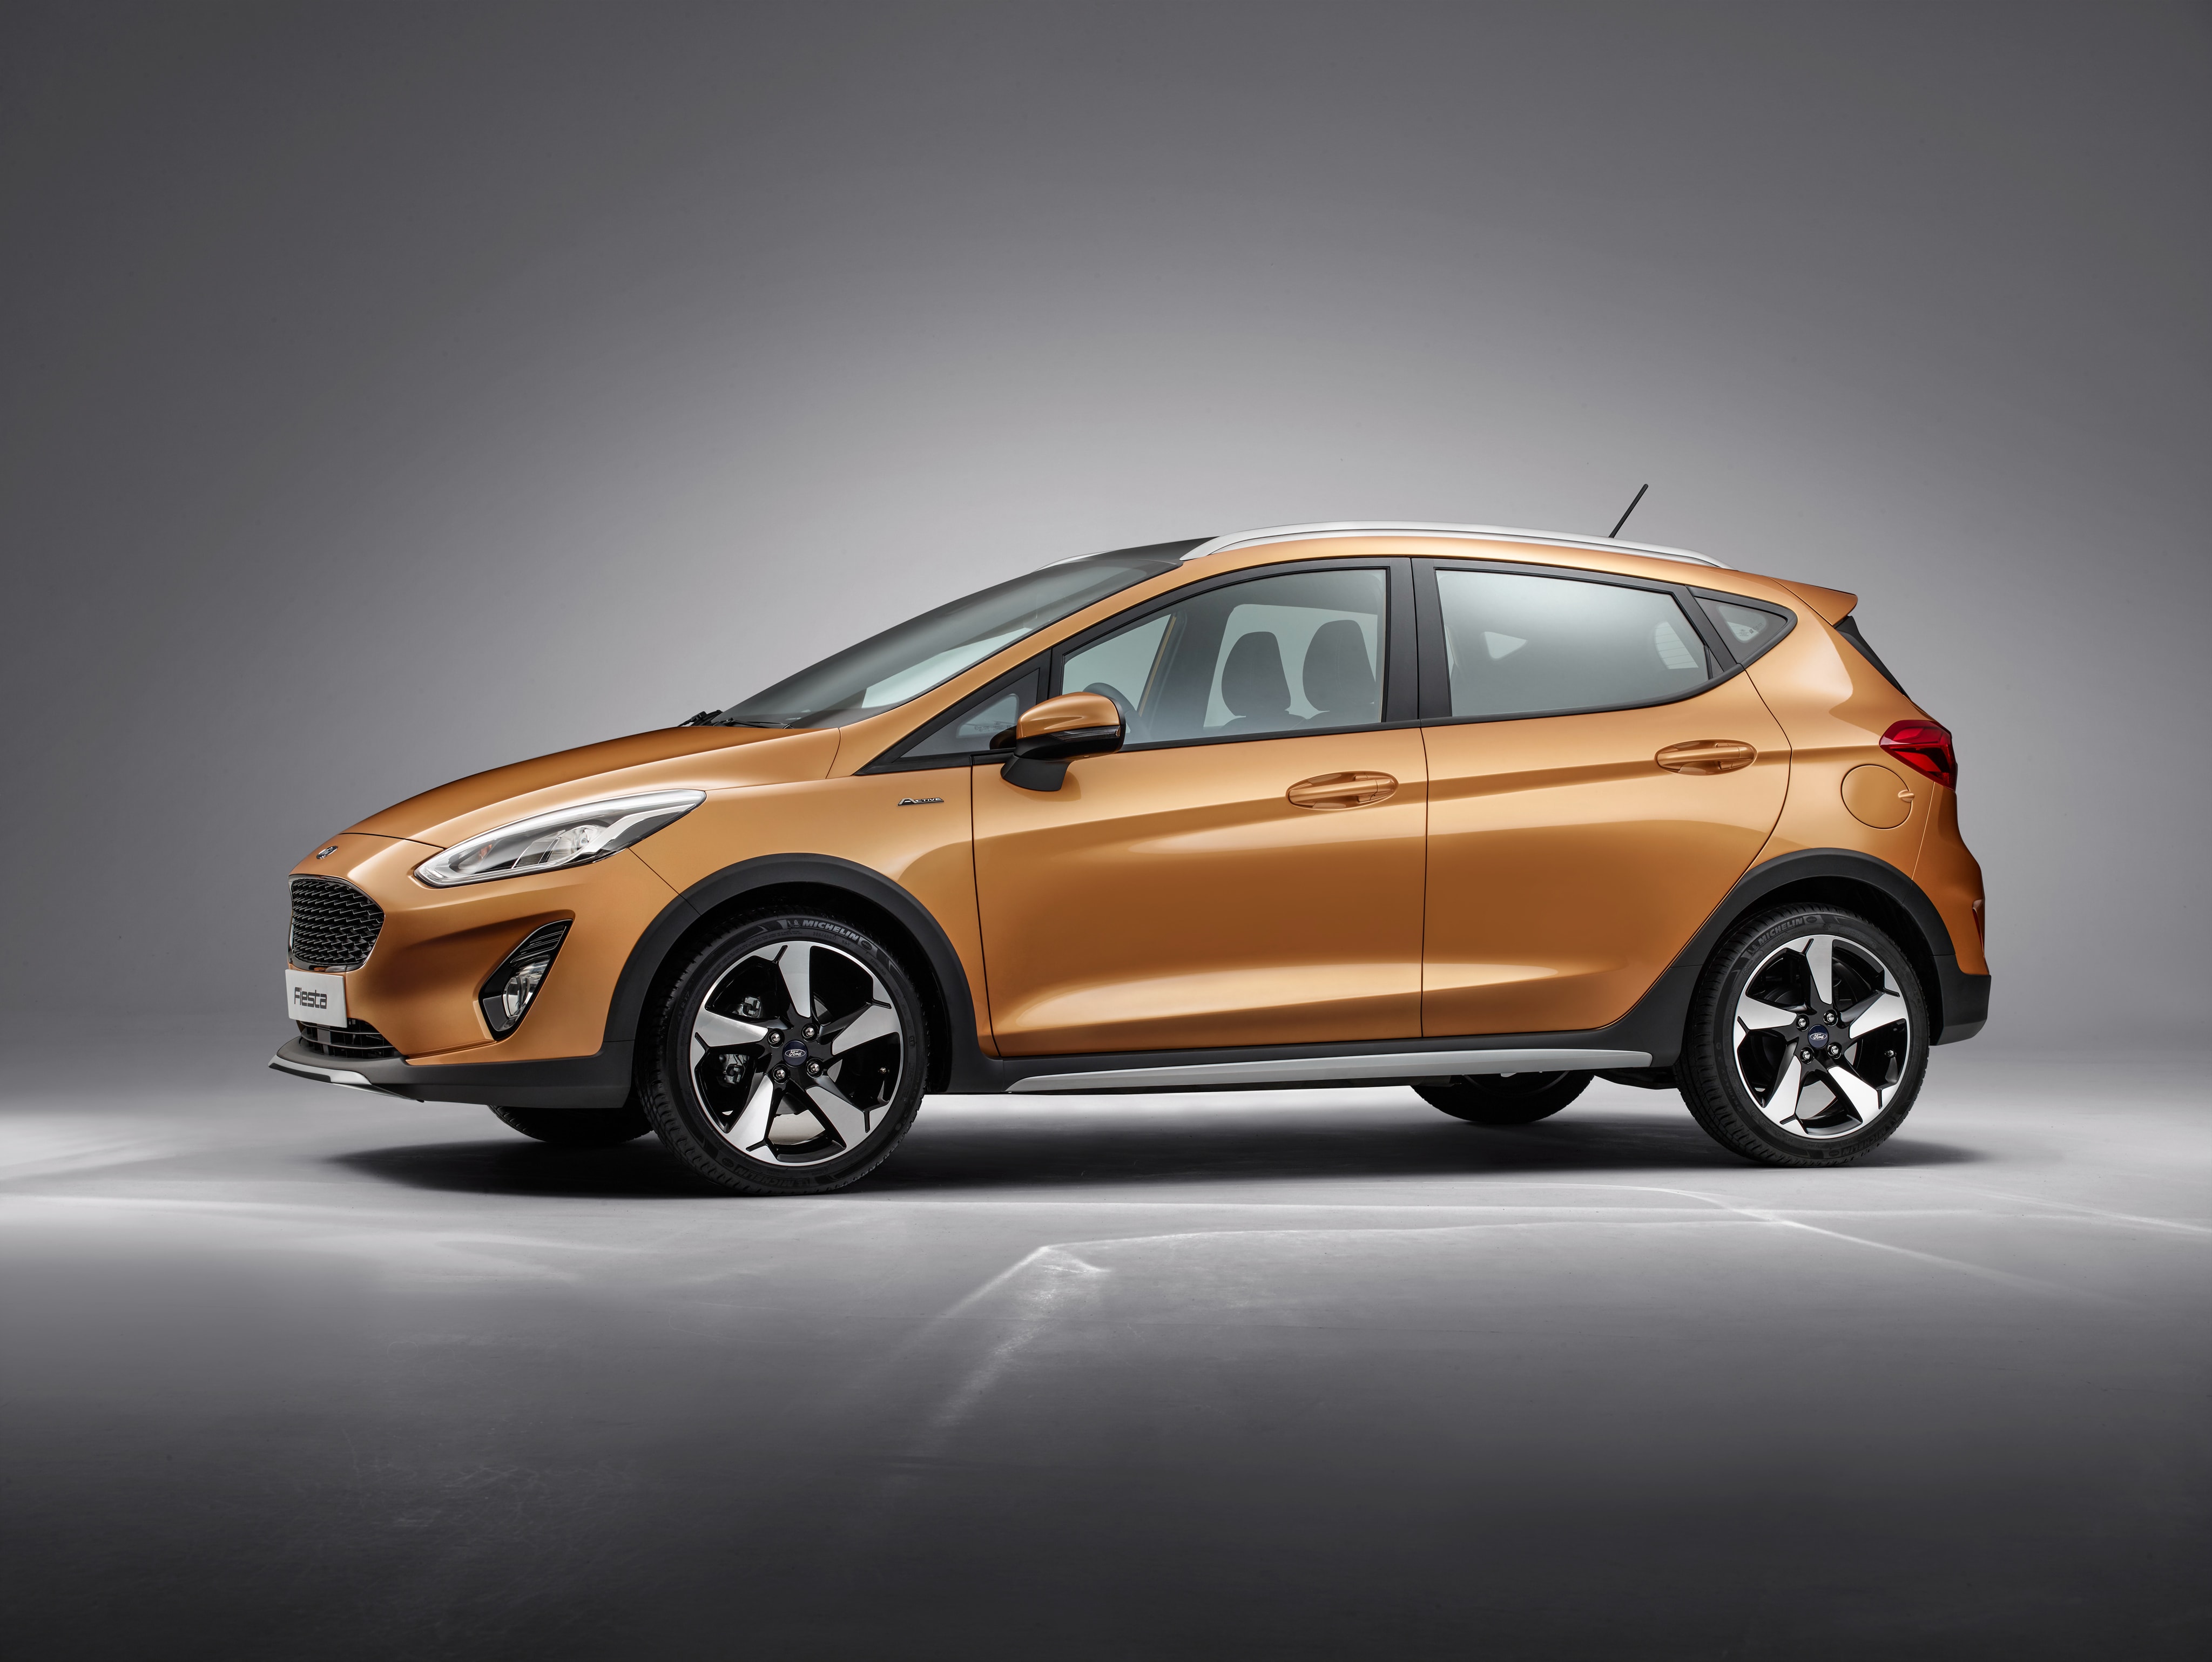 Getting To Know The 2017 Ford Fiesta